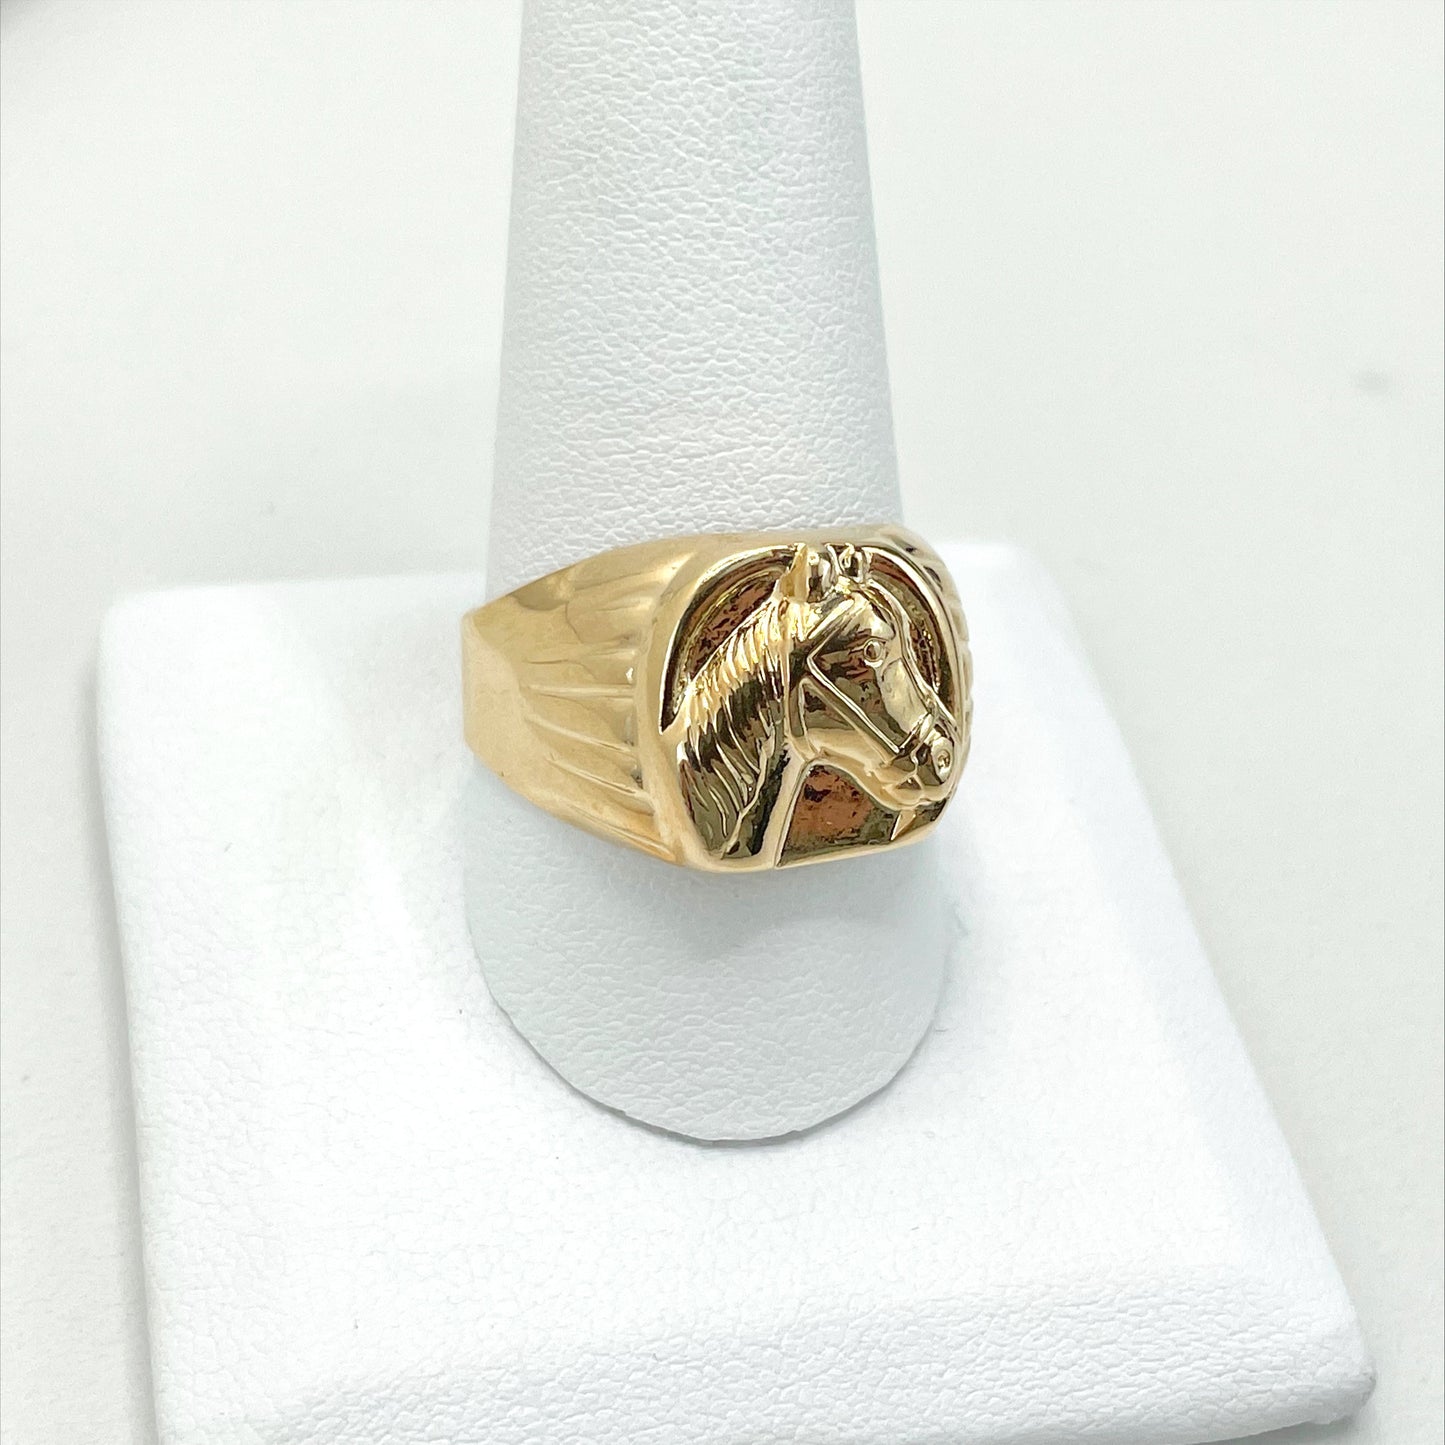 18k Gold Filled Raised Horse Ring, Head Horse Head Ring, Men's Ring, Wholesale Jewelry Making Supplies